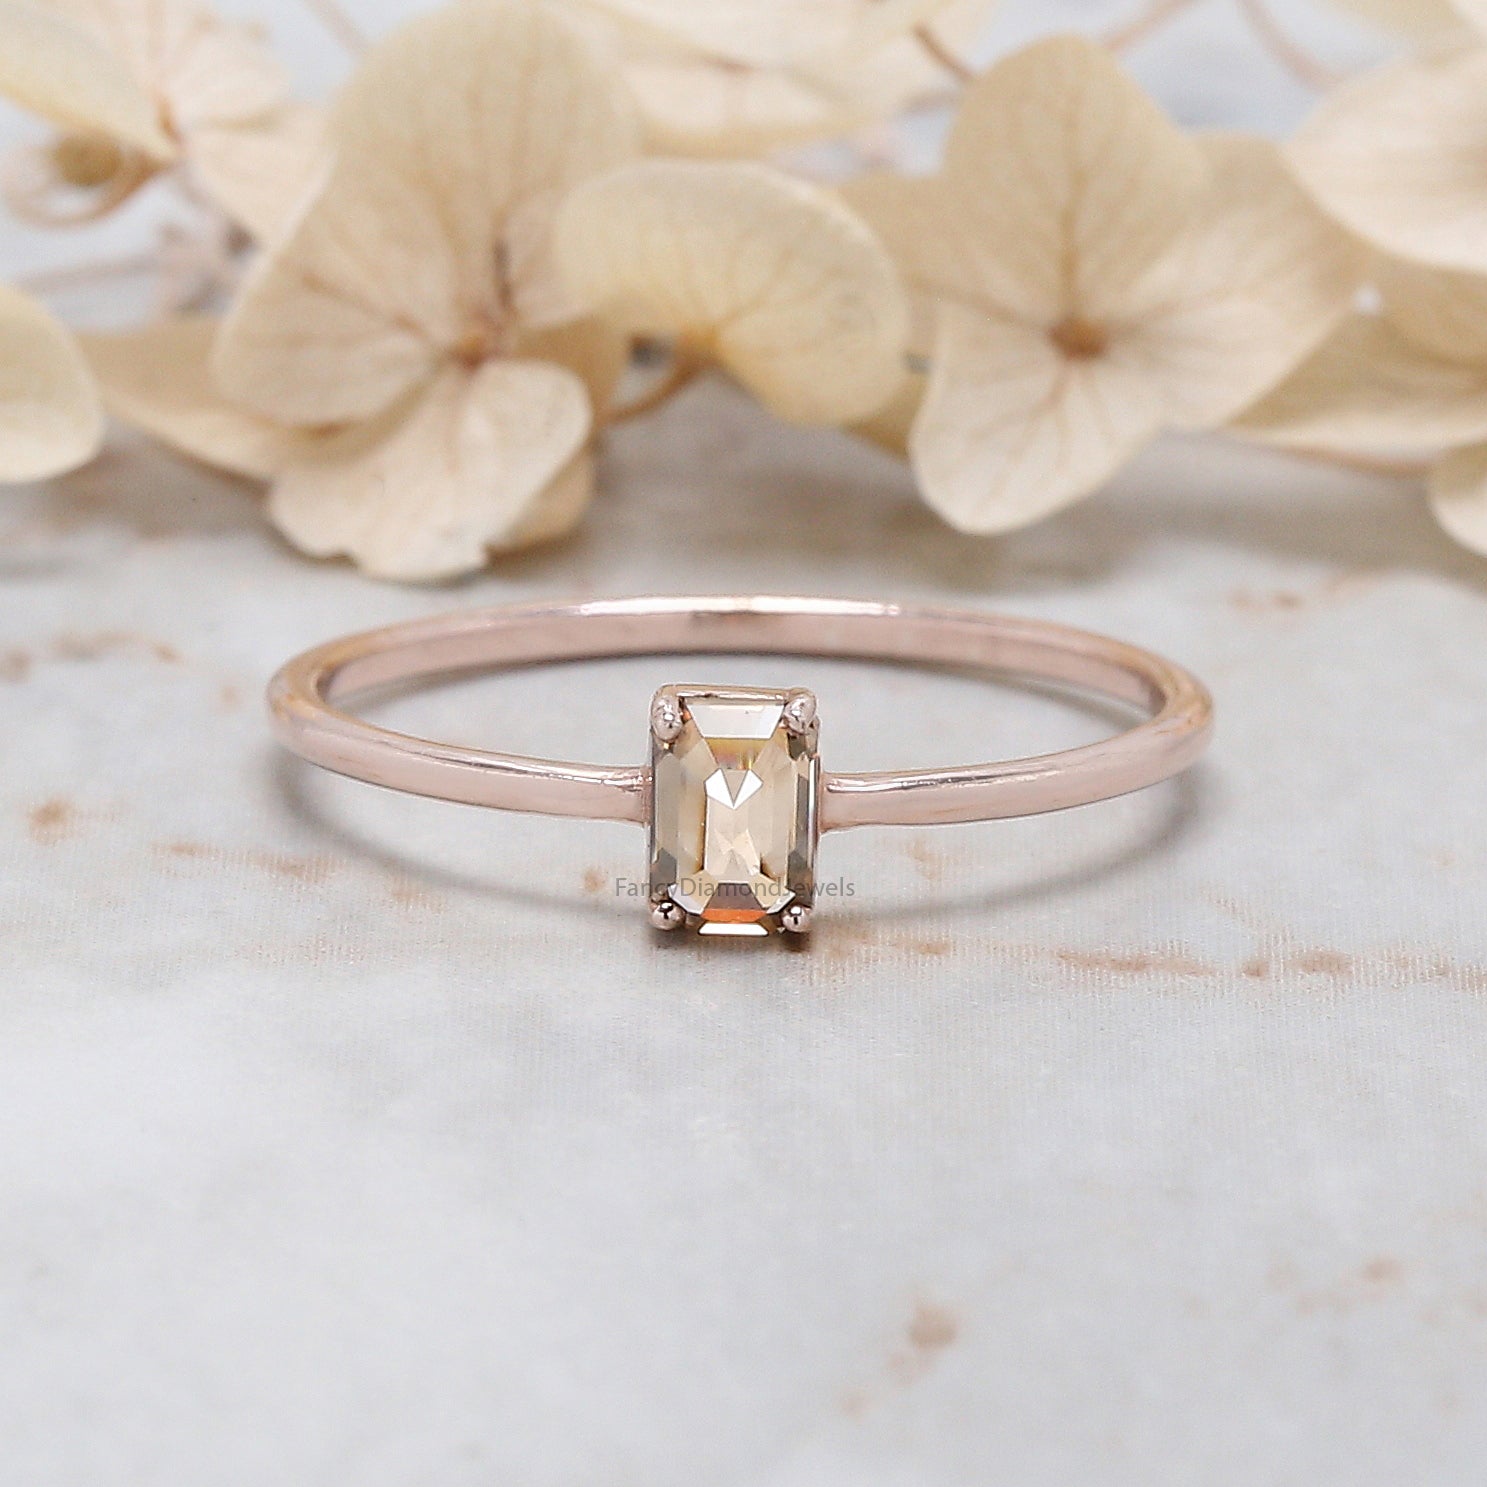 Emerald Cut Brown Color Diamond Ring 0.35 Ct 4.50 MM Emerald Shape Diamond Ring 14K Rose Gold Silver Engagement Ring Gift For Her QN1166